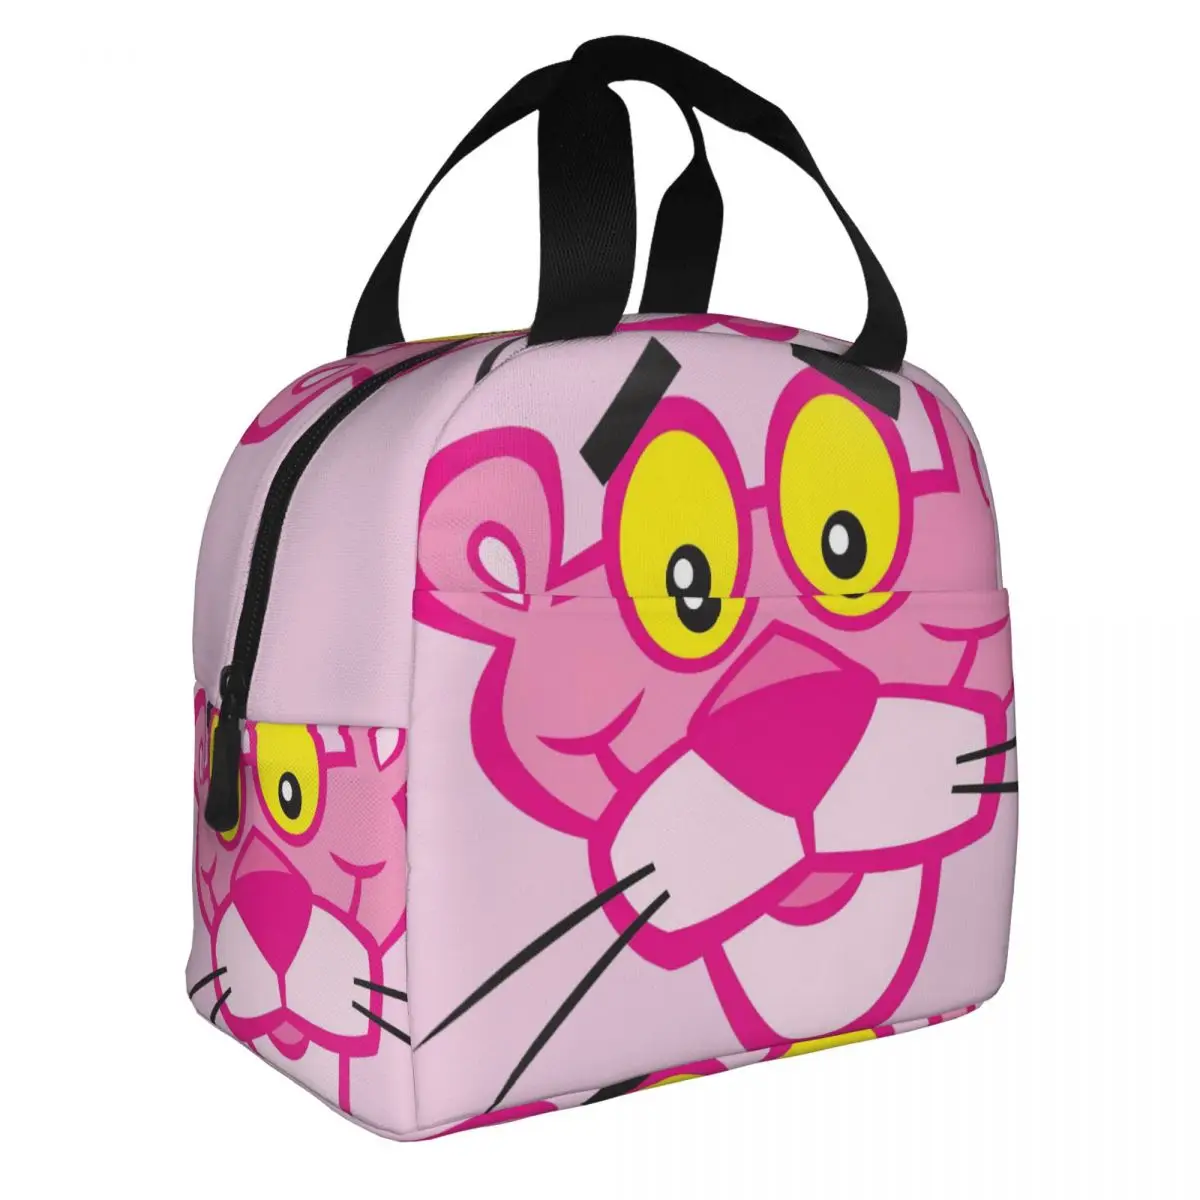 Pink Panther Lunch Bento Bags Portable Aluminum Foil thickened Thermal Cloth Lunch Bag for Women Men Boy